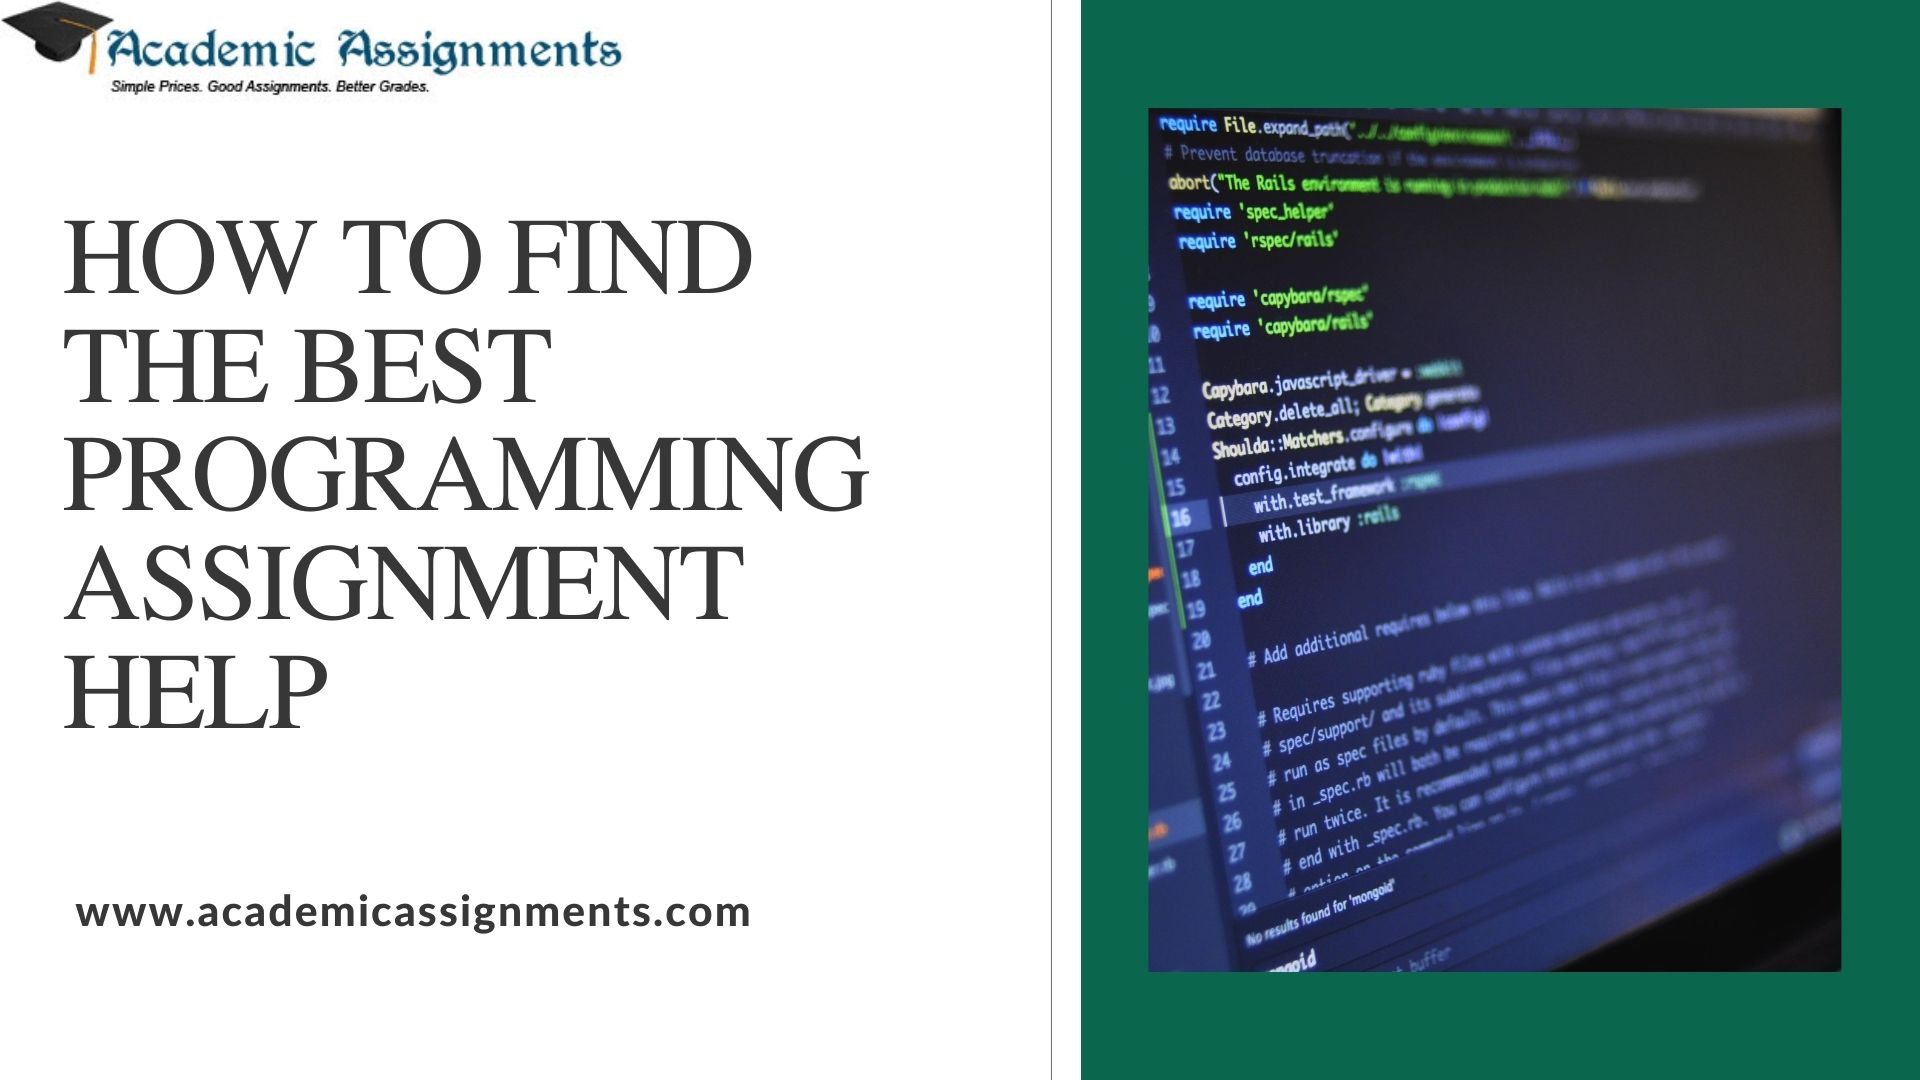 HOW TO FIND THE BEST PROGRAMMING ASSIGNMENT HELP